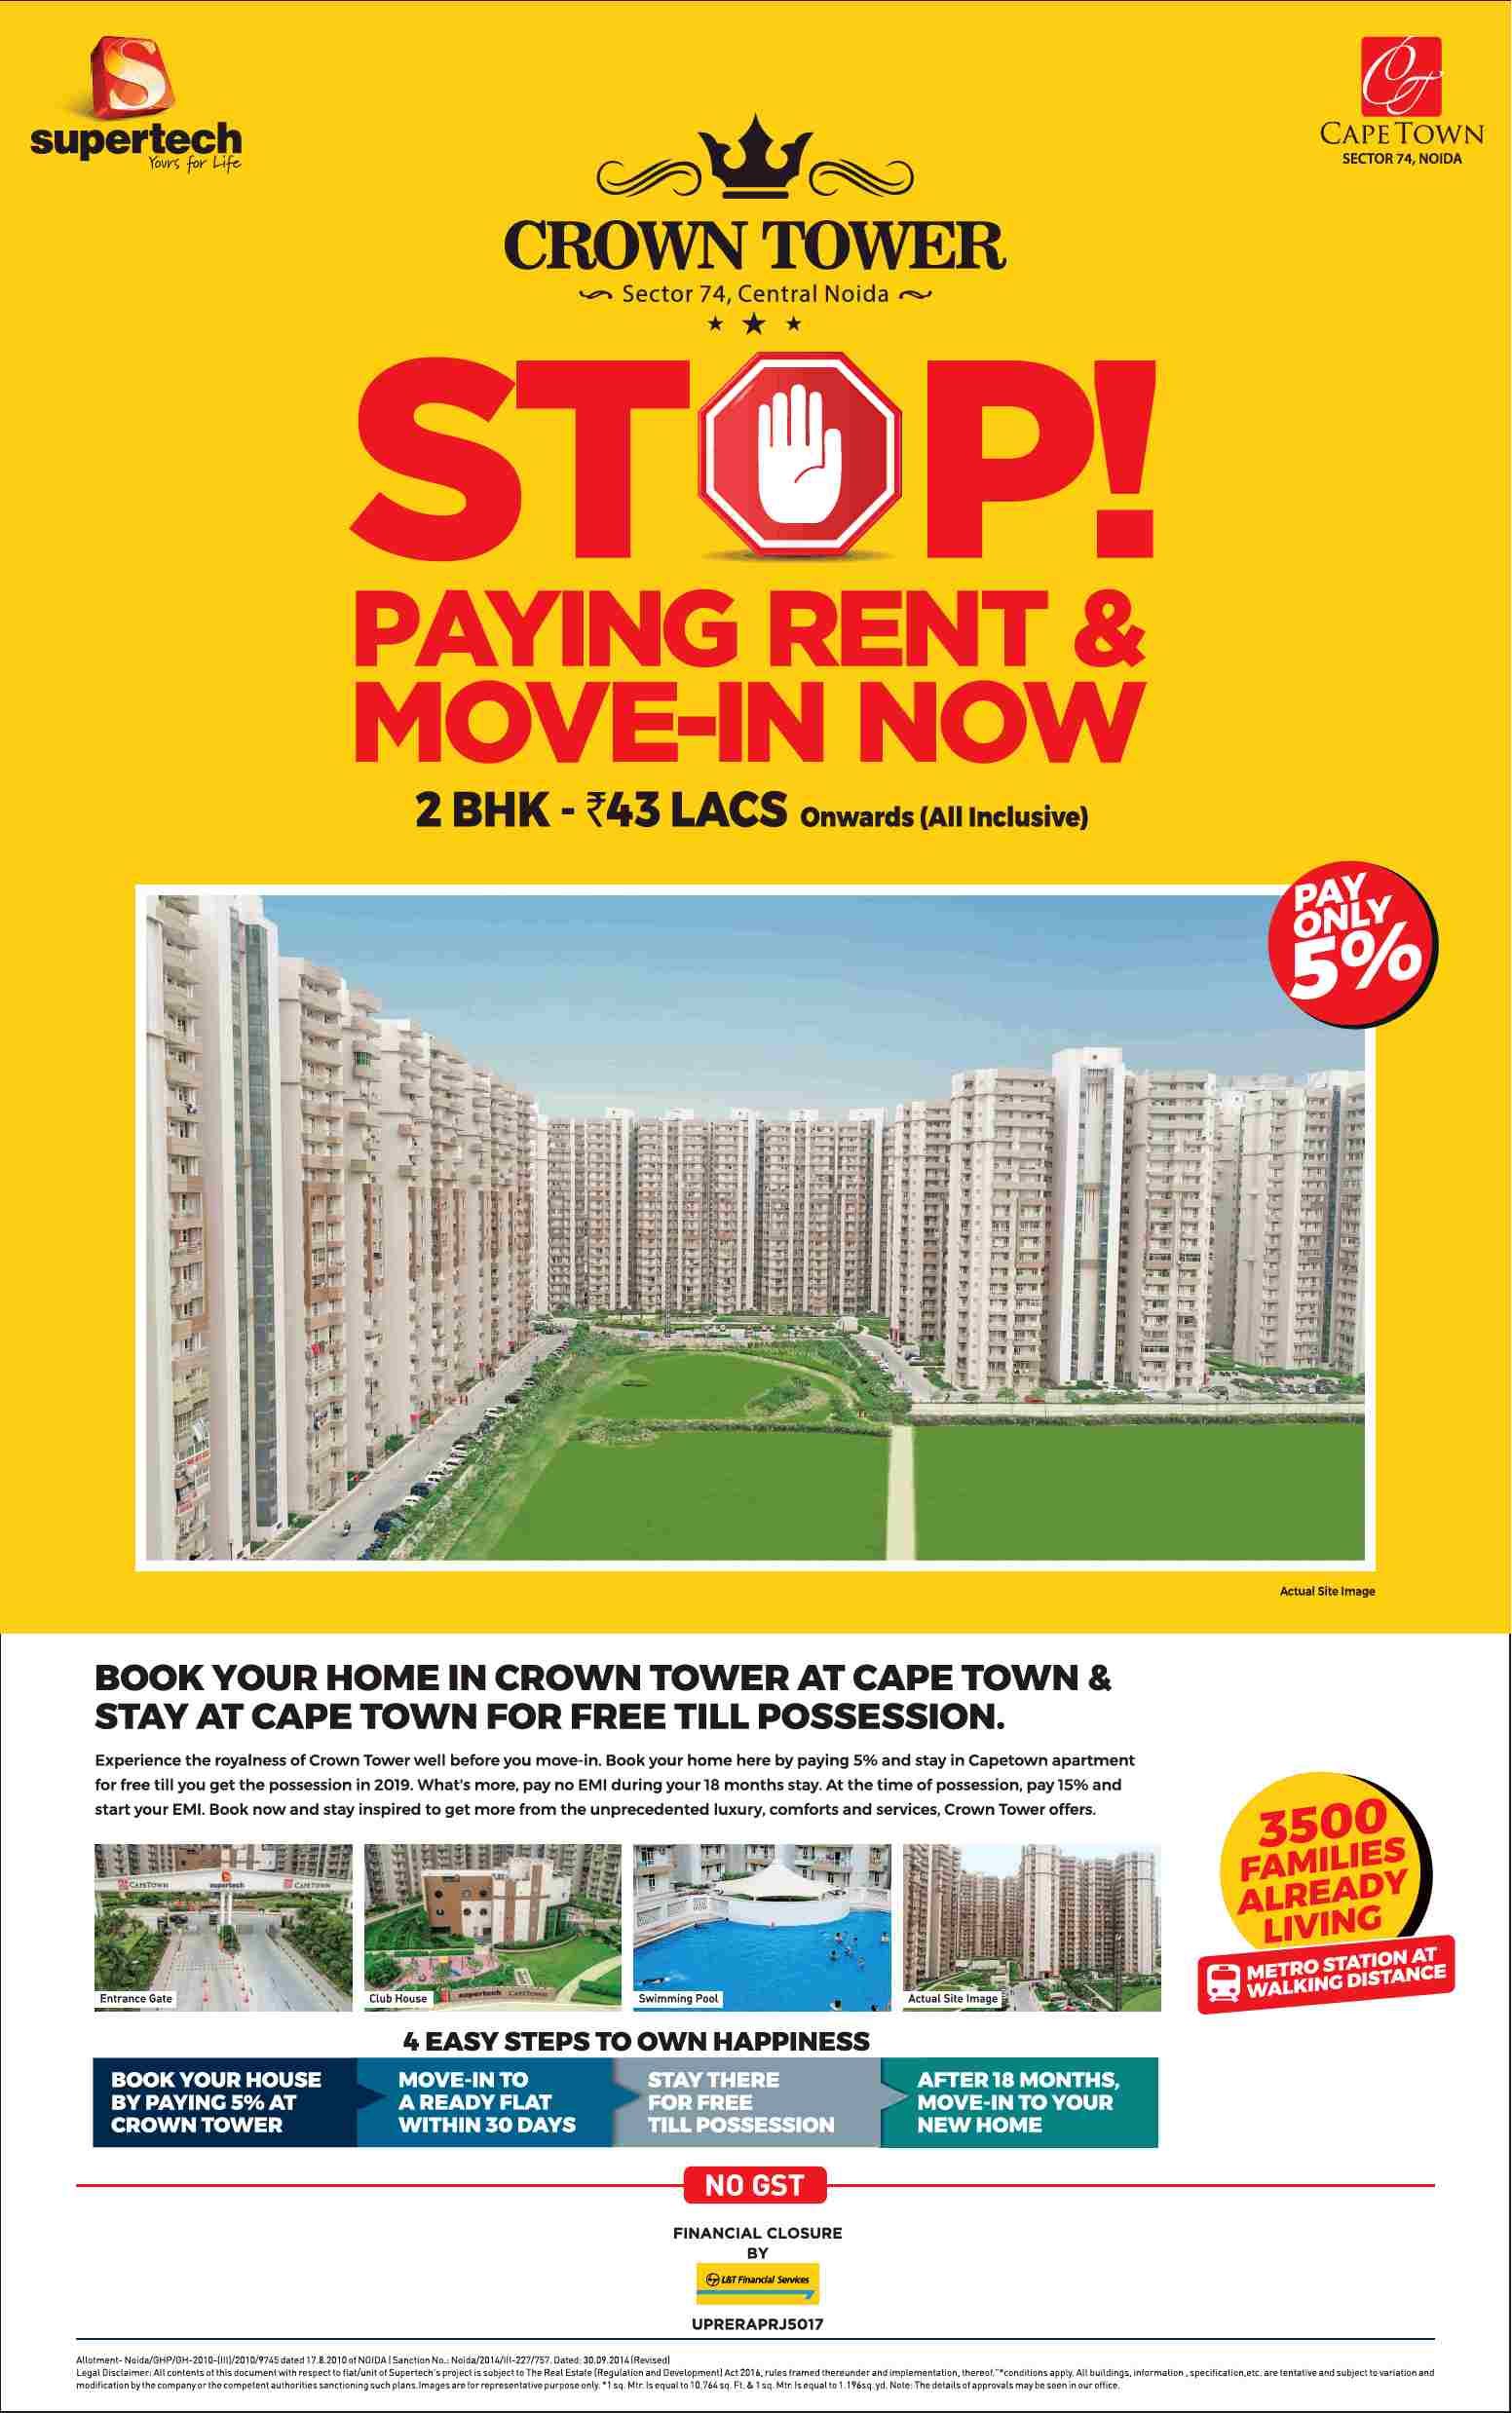 Book 2 BHK starting at Rs. 43 Lacs onwards all inclusive at Supertech Crown Tower in Noida Update